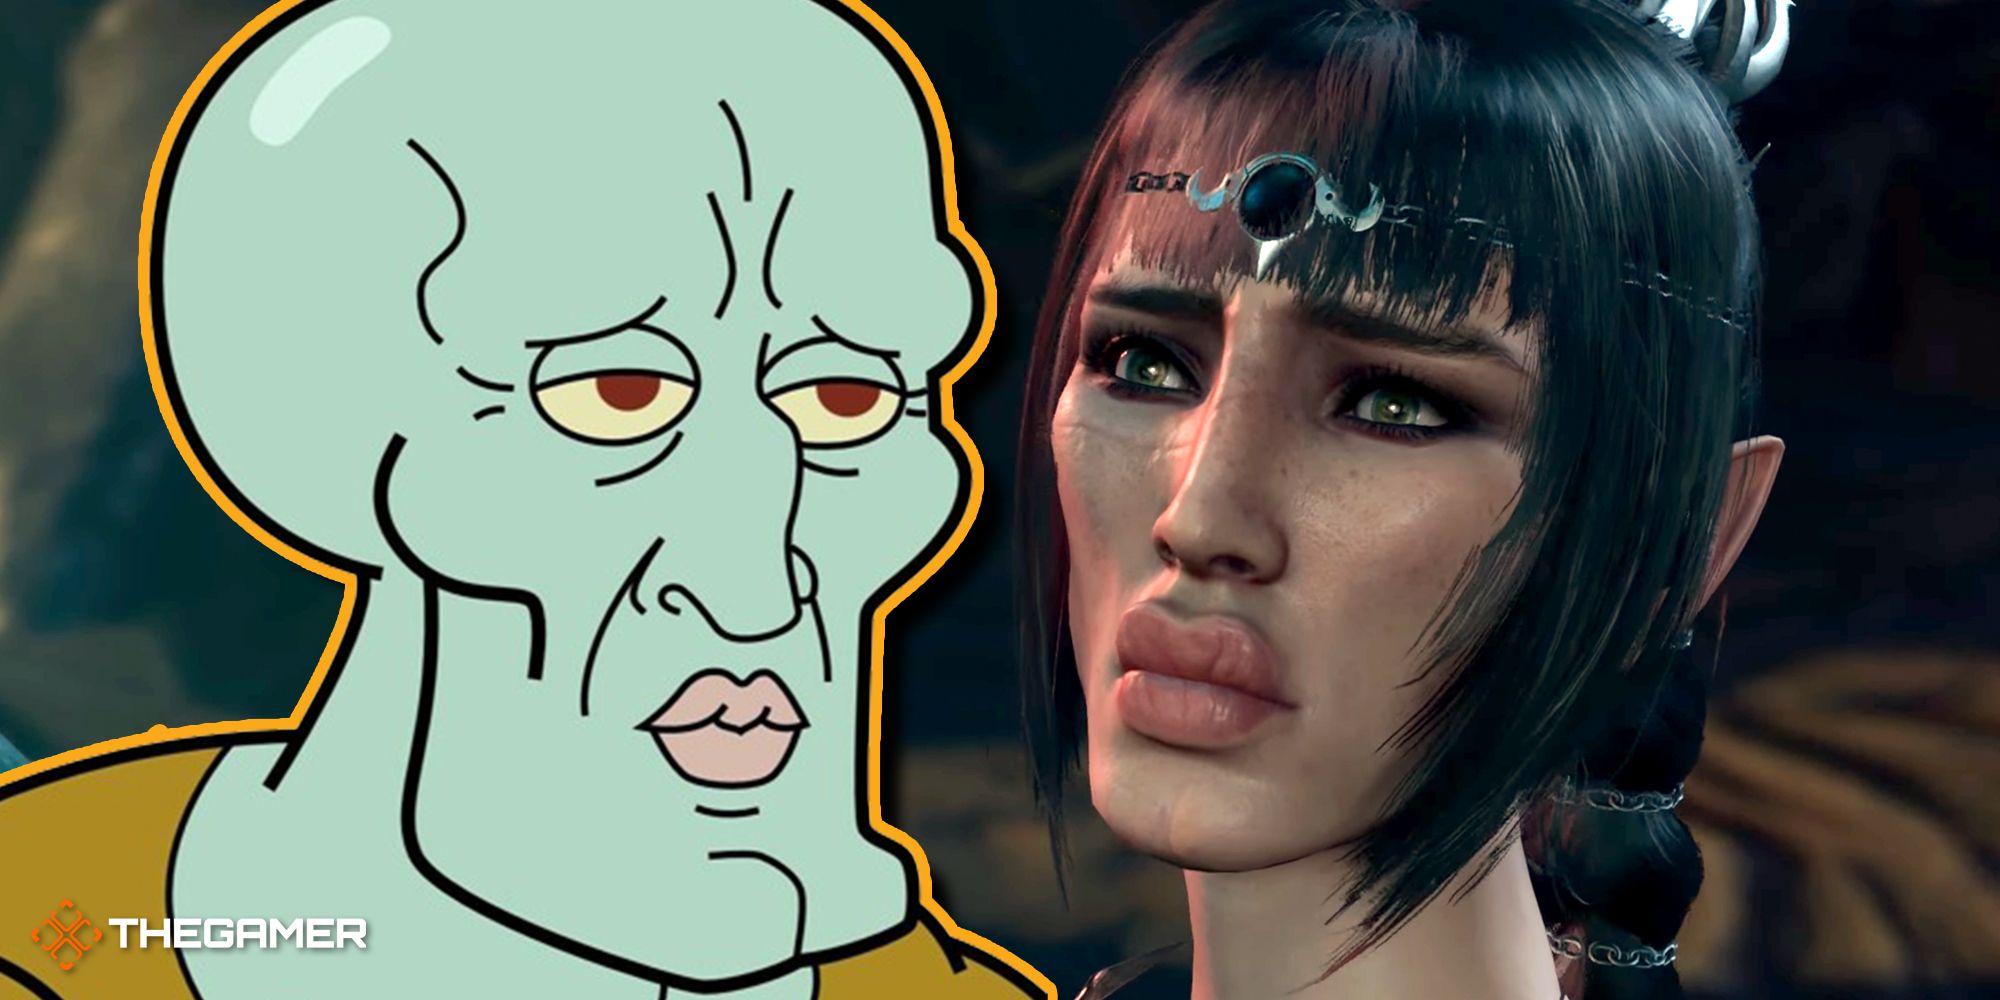 Handsome Squidward outlined in yellow on the left, Shadowheart with the handsome Squidward mod on the right